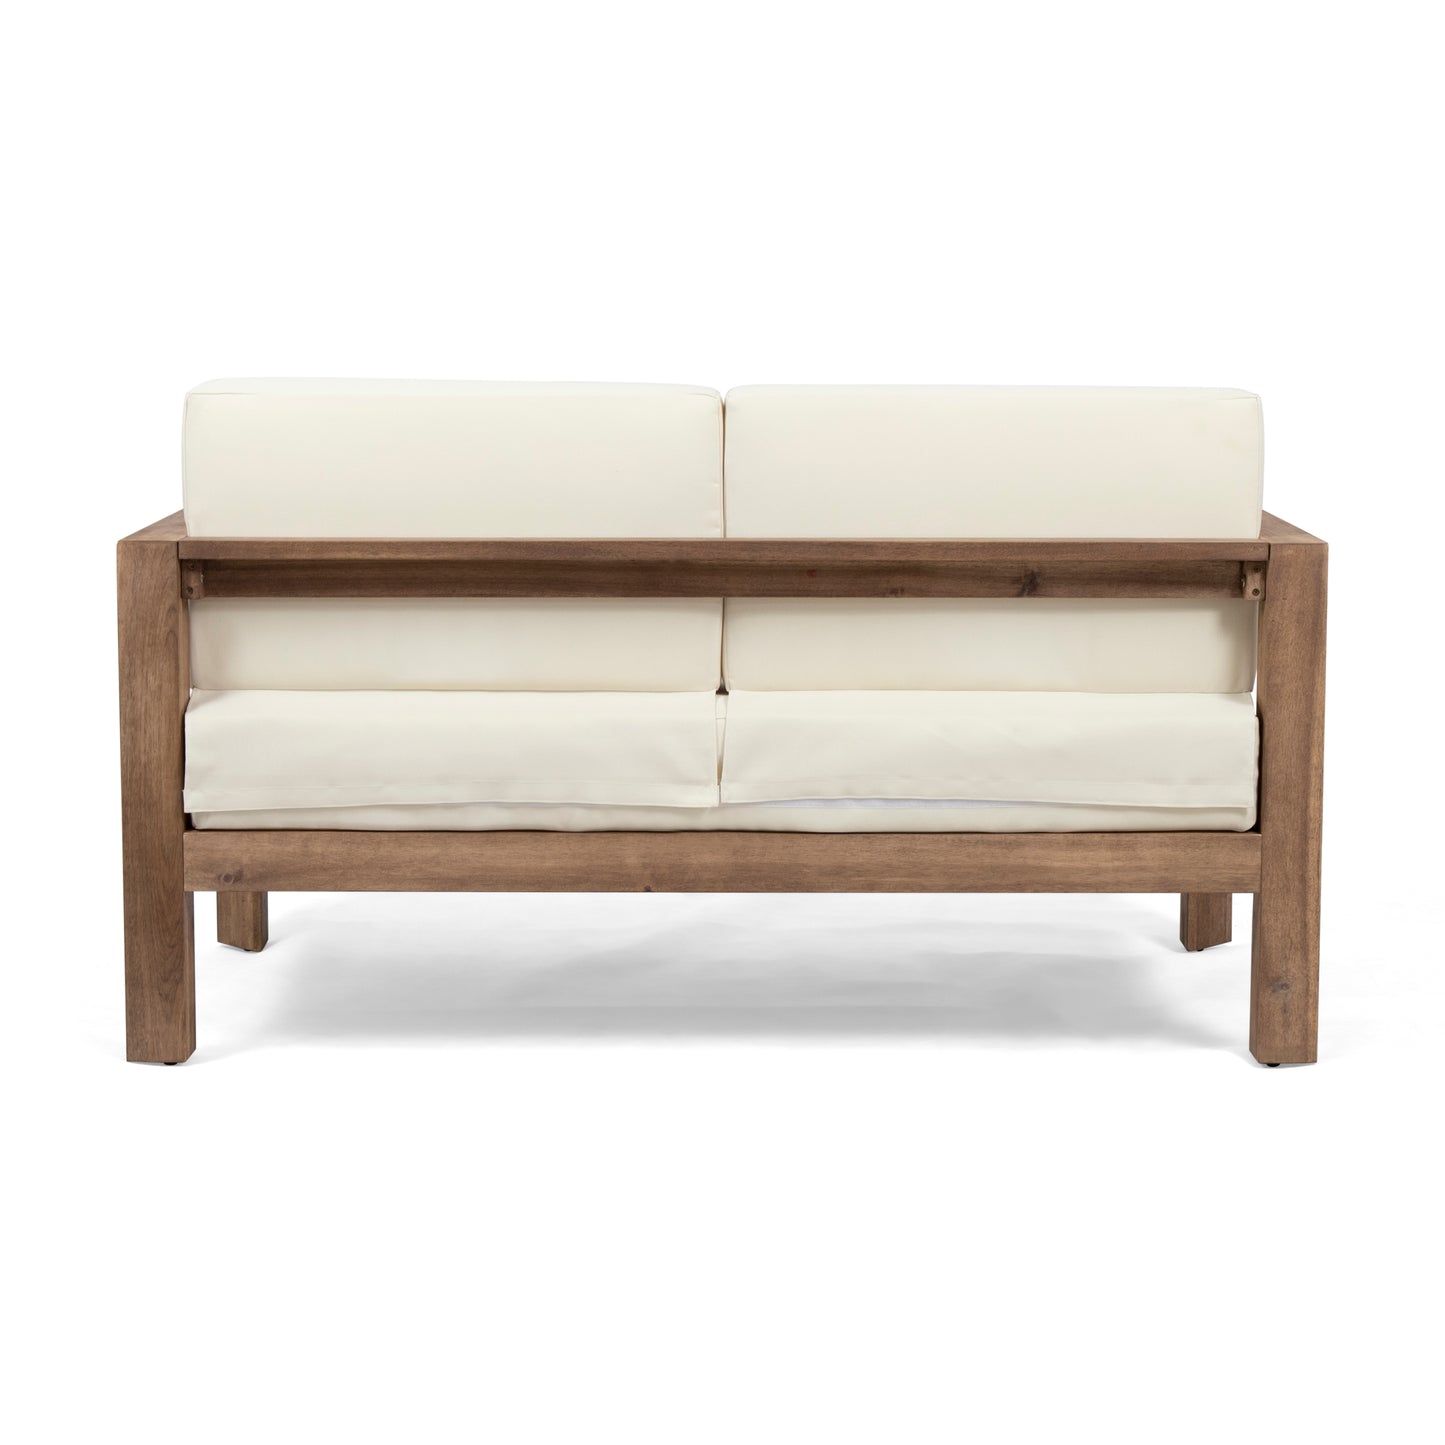 Rosemary Outdoor 4 Seater Acacia Wood Chat Set